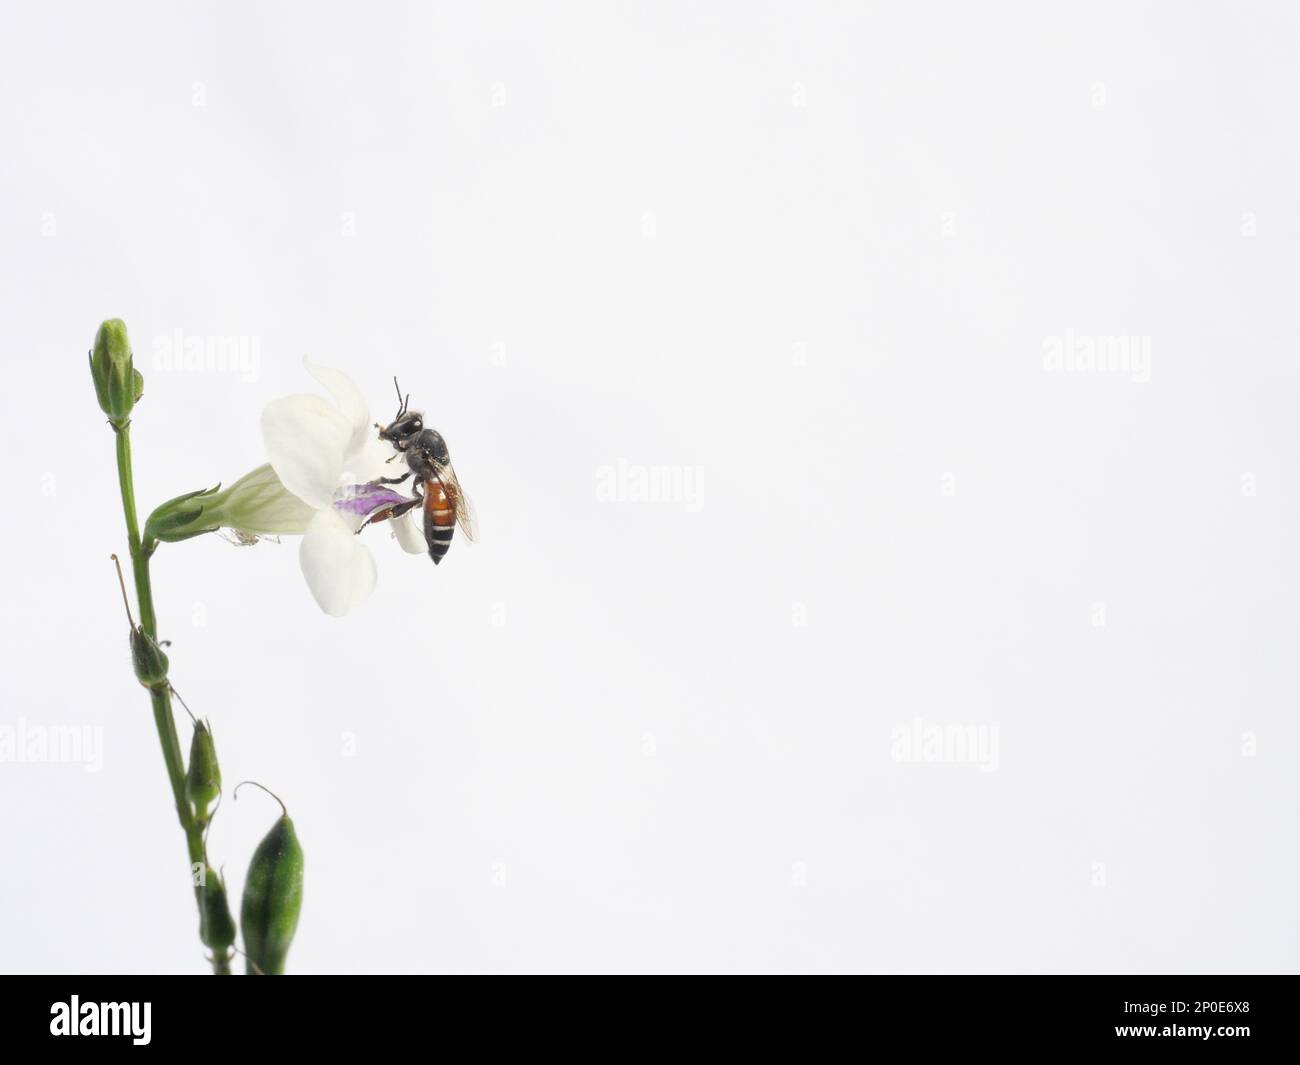 Red dwarf honey bee seeking nectar on white Chinese violet or coromandel or creeping foxglove ( Asystasia gangetica ) blossom in field on white backgr Stock Photo